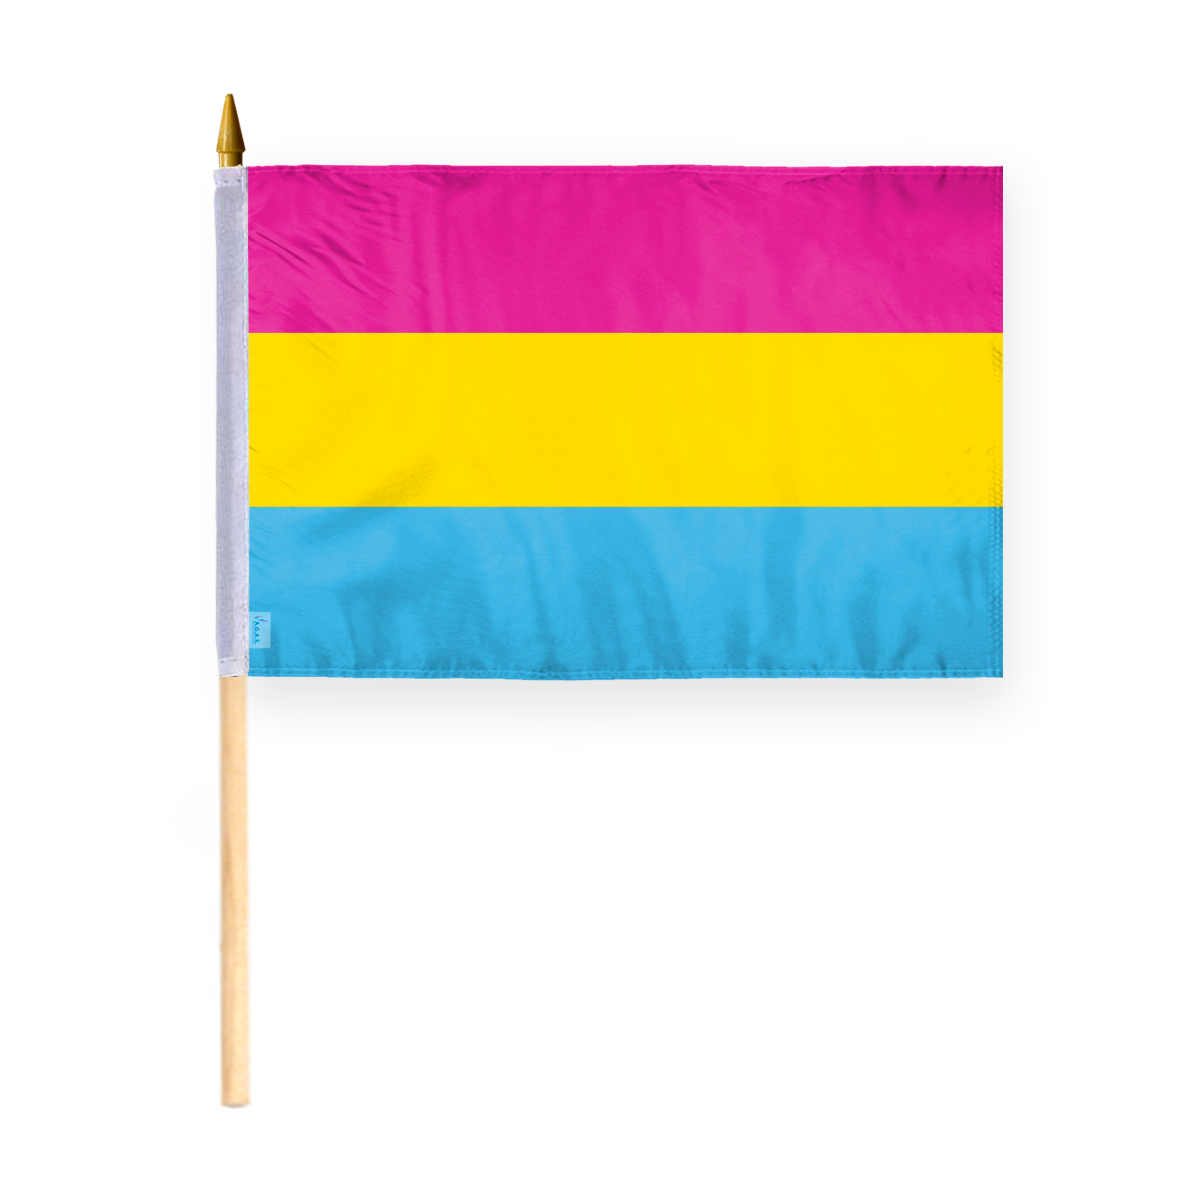 AGAS Pansexual Pride Stick Flag 12x18 inch Flag